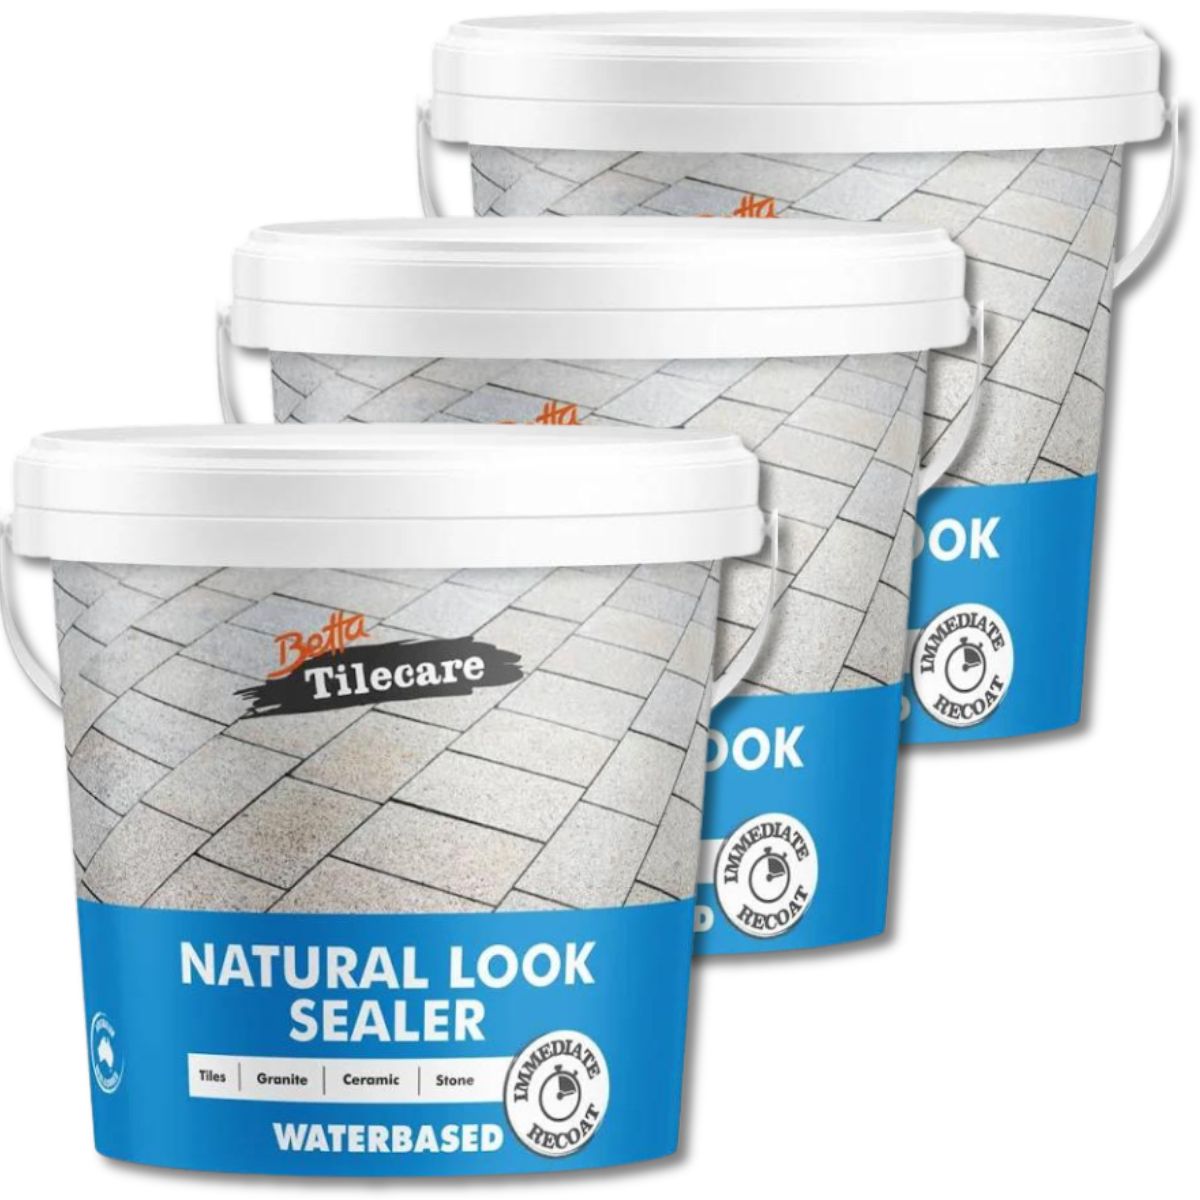 Paving & Concrete Natural Look Sealer | Bondall Betta Tile Care Waterbased Sealer 4 litres - South East Clearance Centre